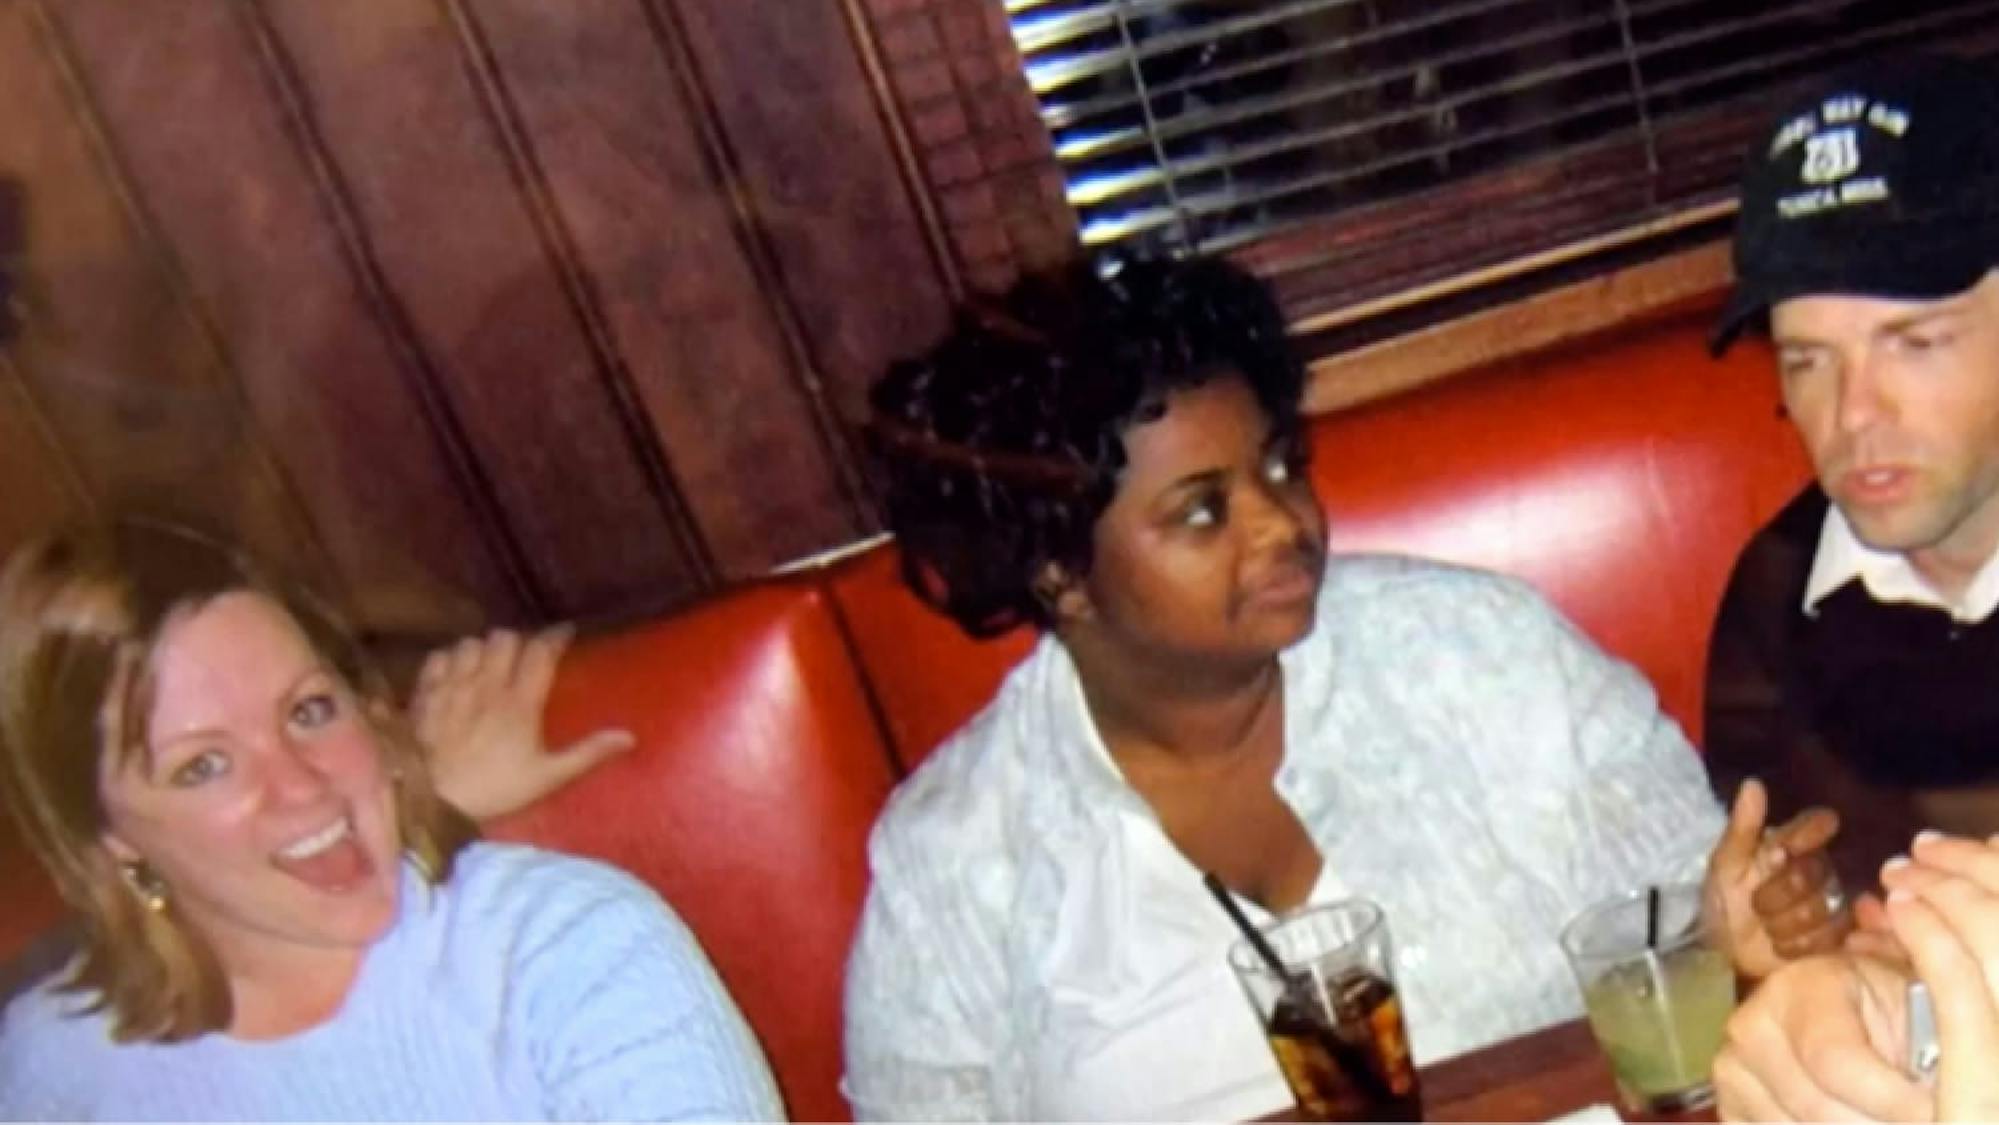 A picture from the early days of Melissa McCarthy and Octavia Spencer’s friendship. They both look young, and sit in a red booth of a restaurant. Melissa smiles at the camera while Octavia seems not to know the picture is being taken and looks elsewhere.